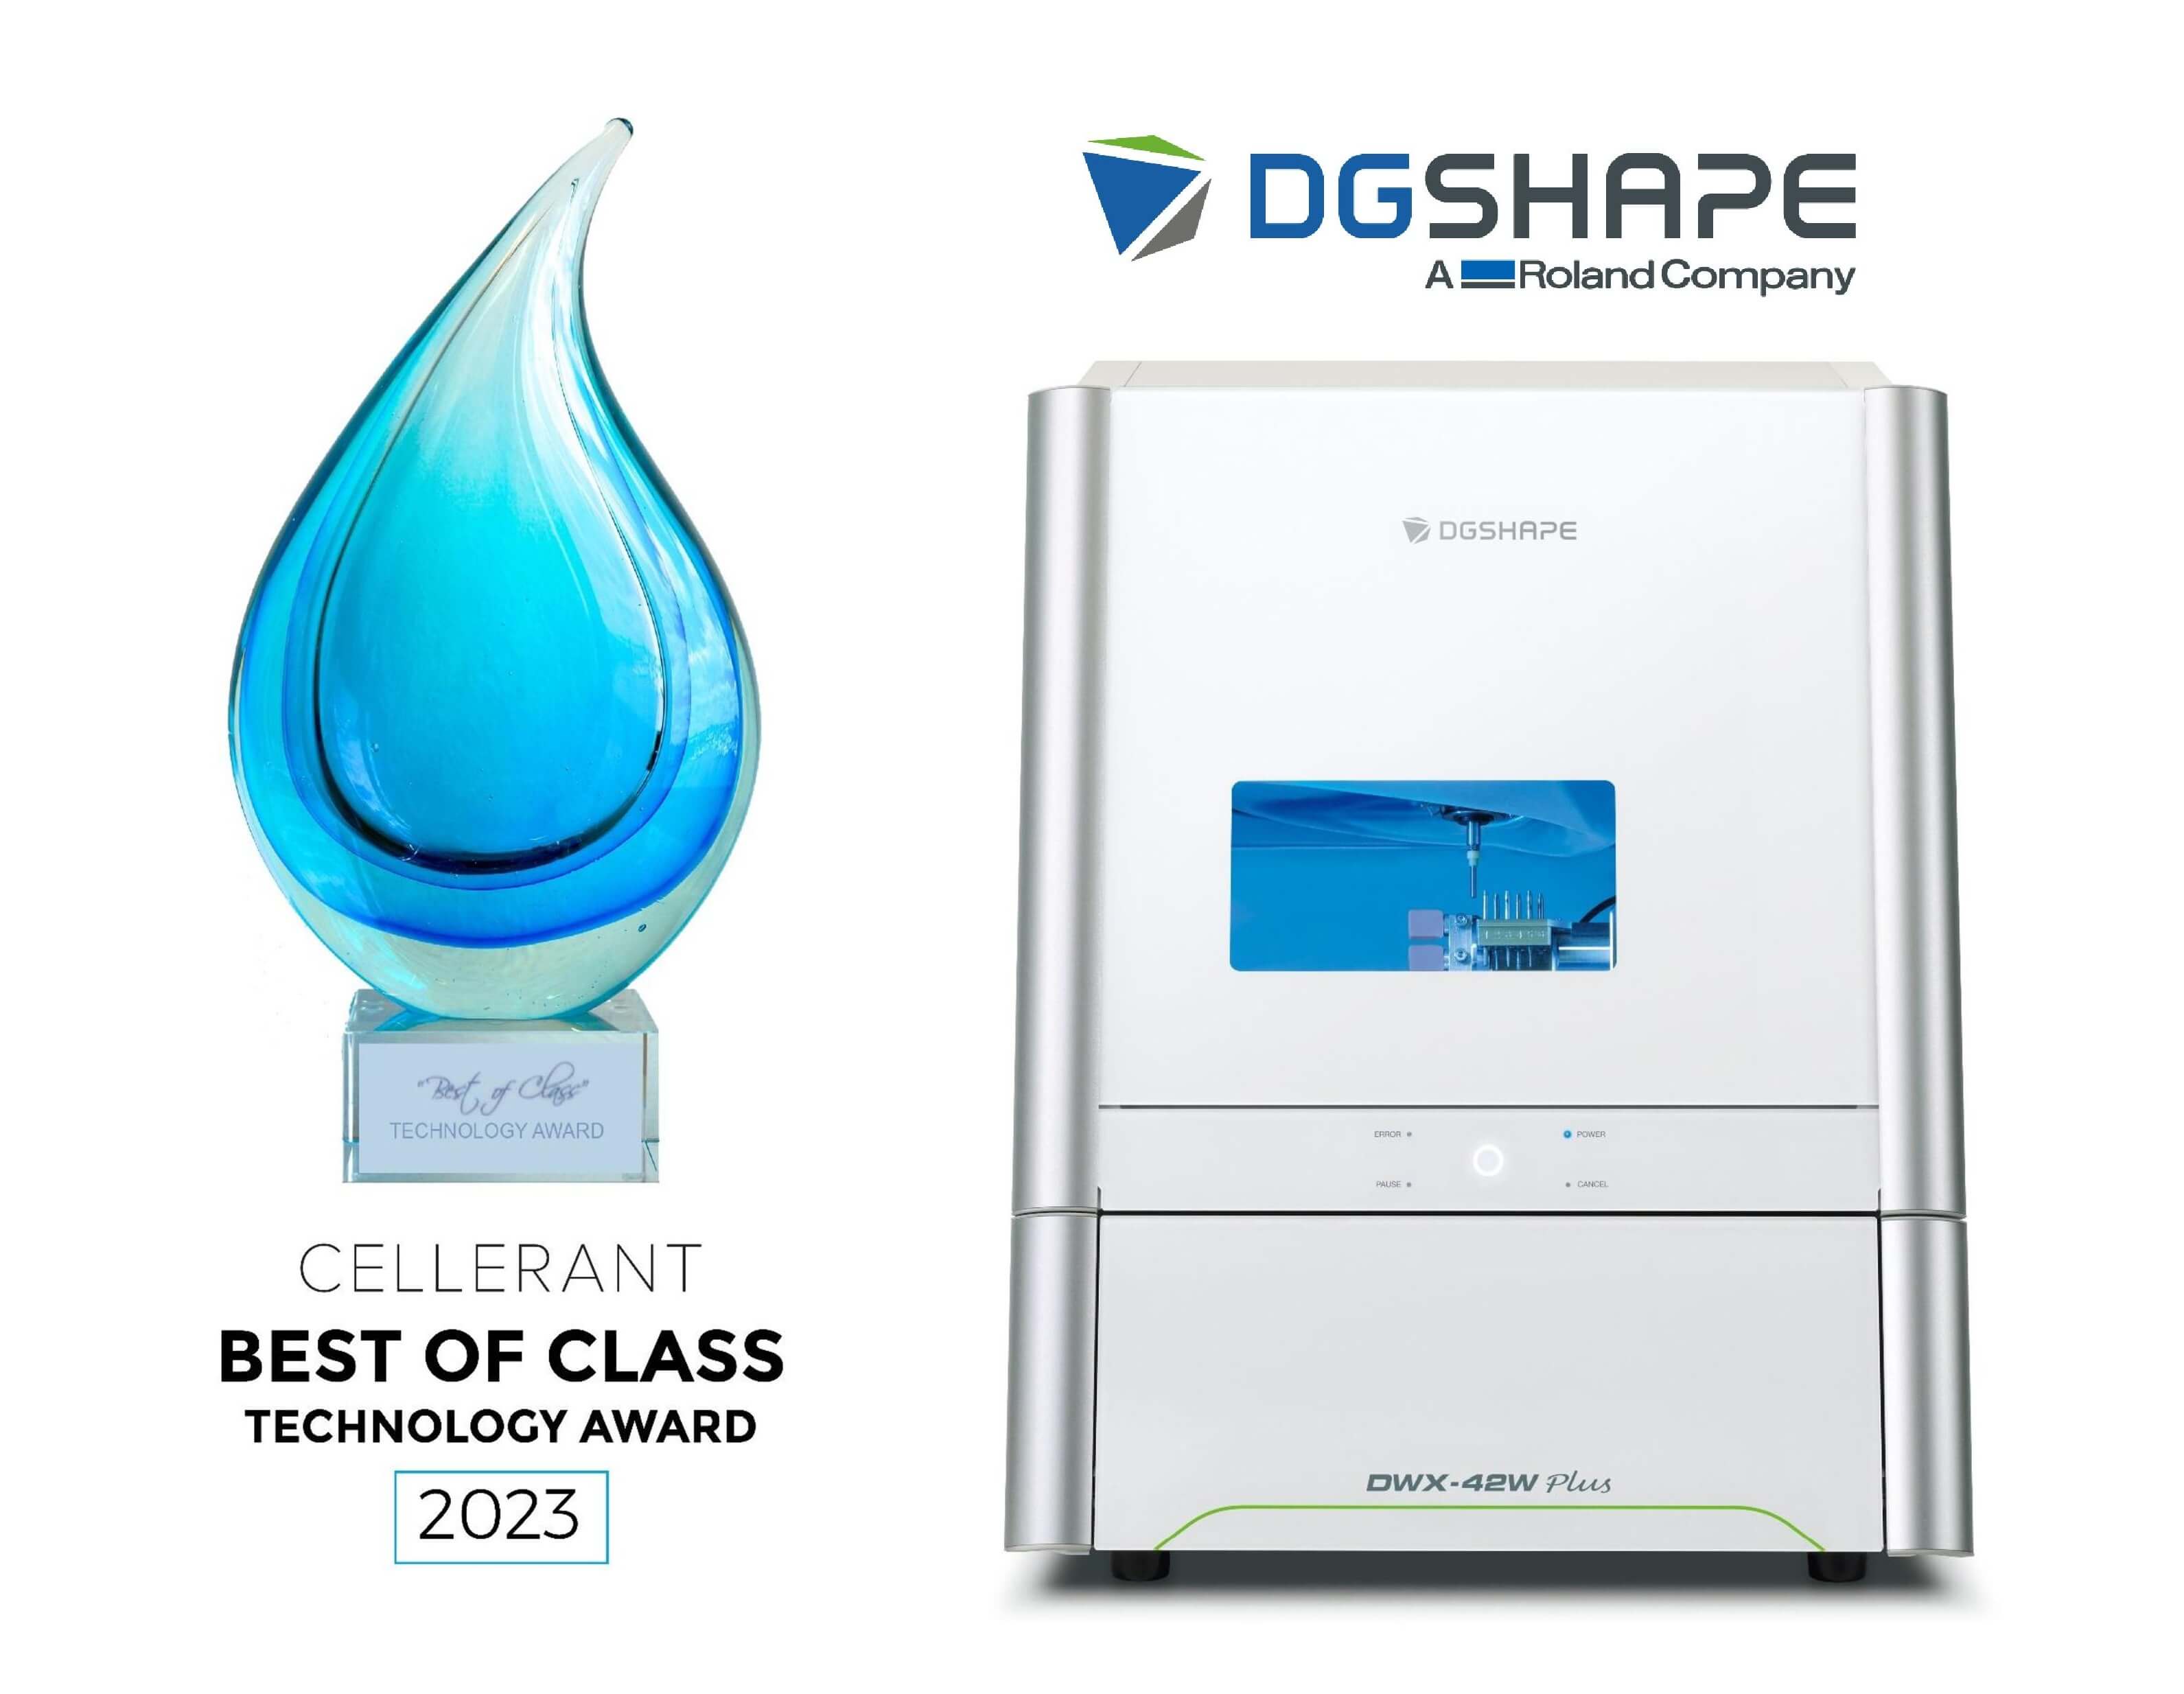 Image of Roland DGA's DGSHAPE DWX-42W Plus Chairside Milling Solution -- winner of the 2023 Cellerant Best of Class Technology Award